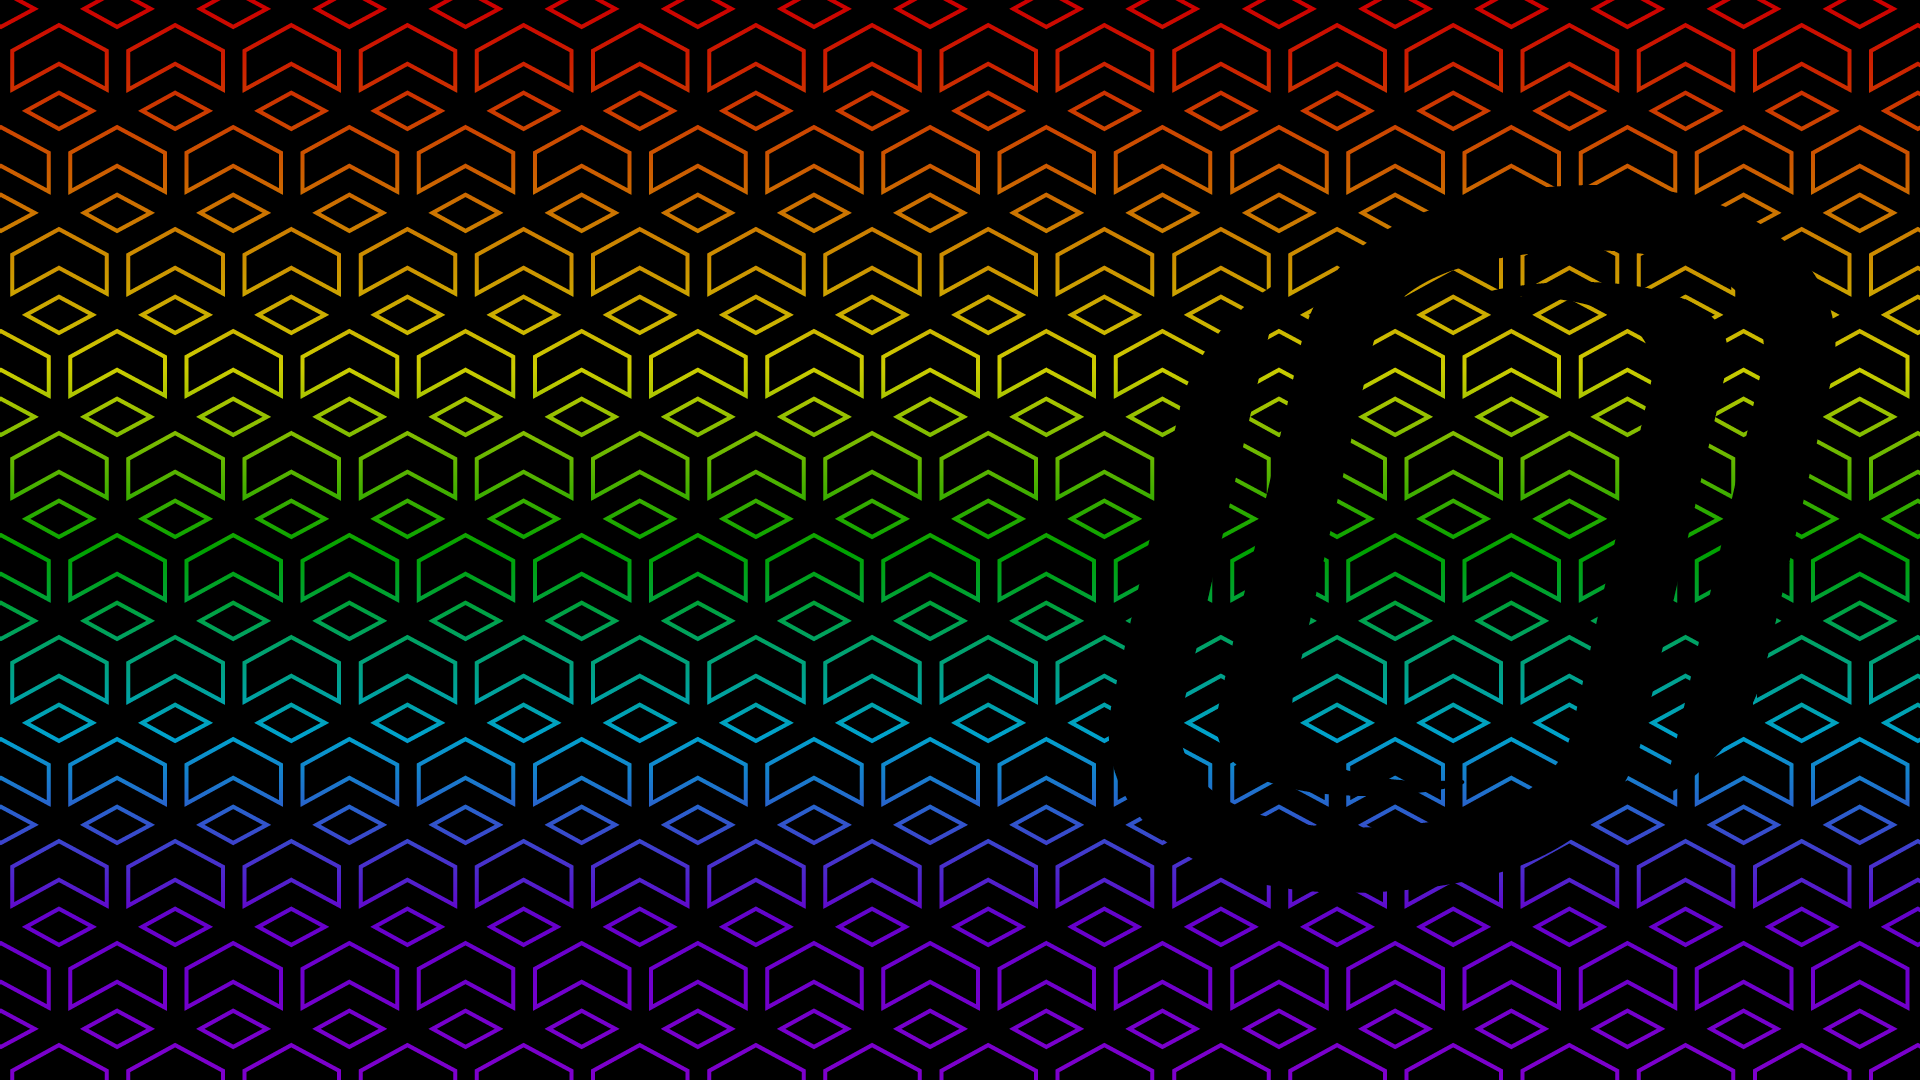 uno_img_zoom_bkgd_h_pride_pattern.png